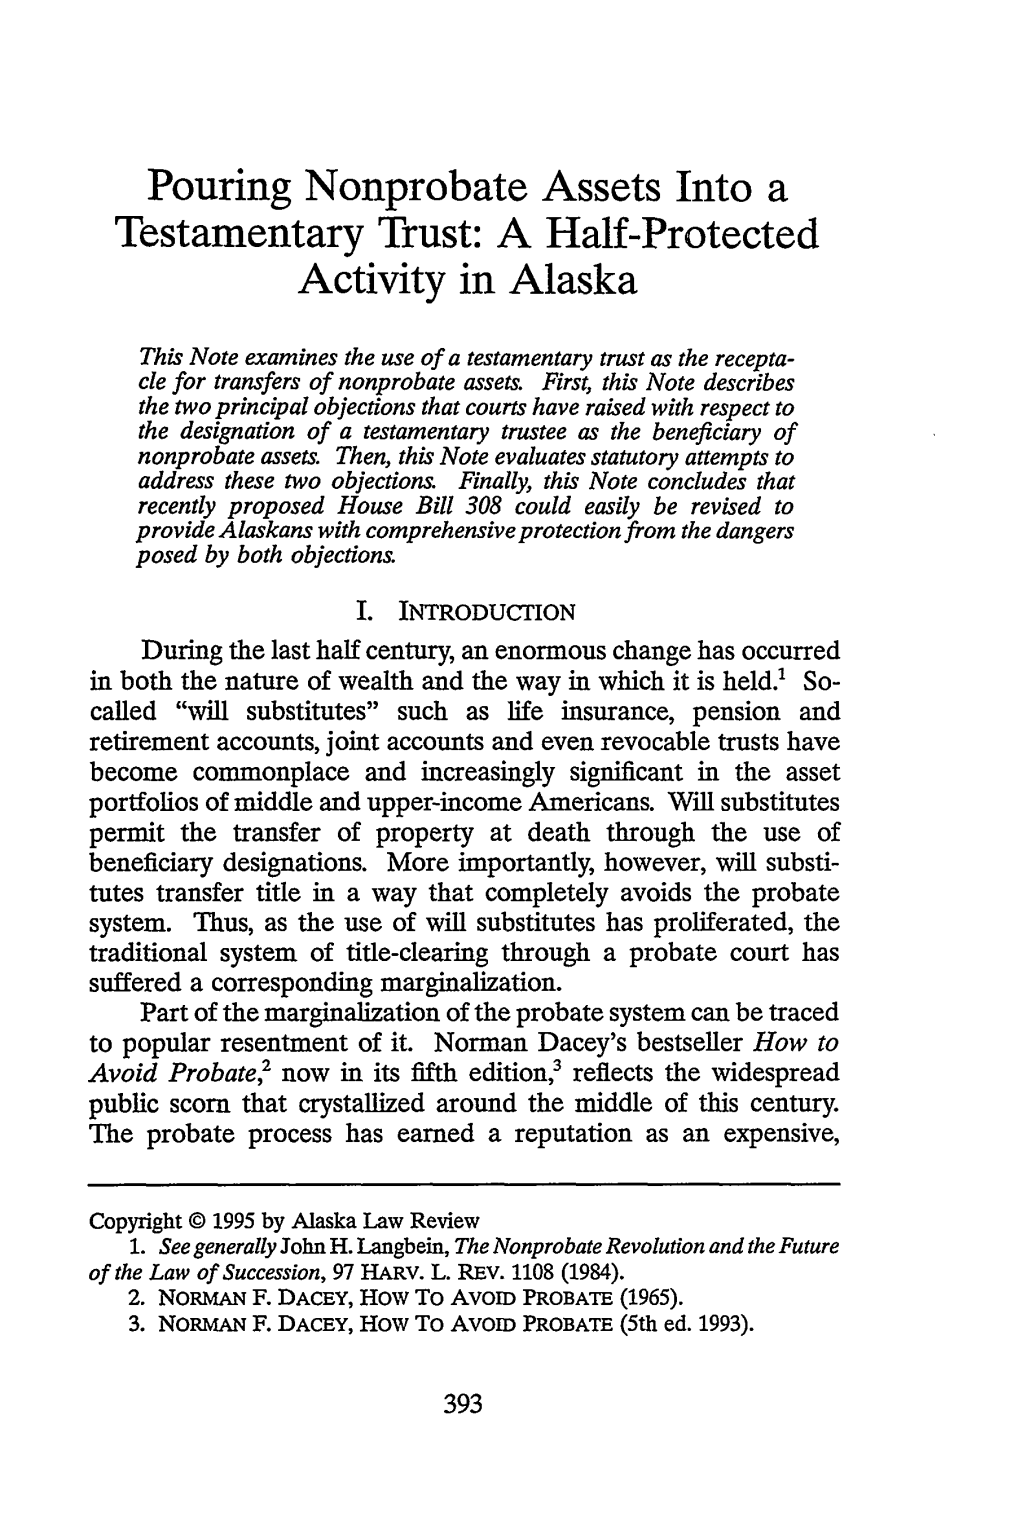 Pouring Nonprobate Assets Into a Testamentary Trust: a Half-Protected Activity in Alaska